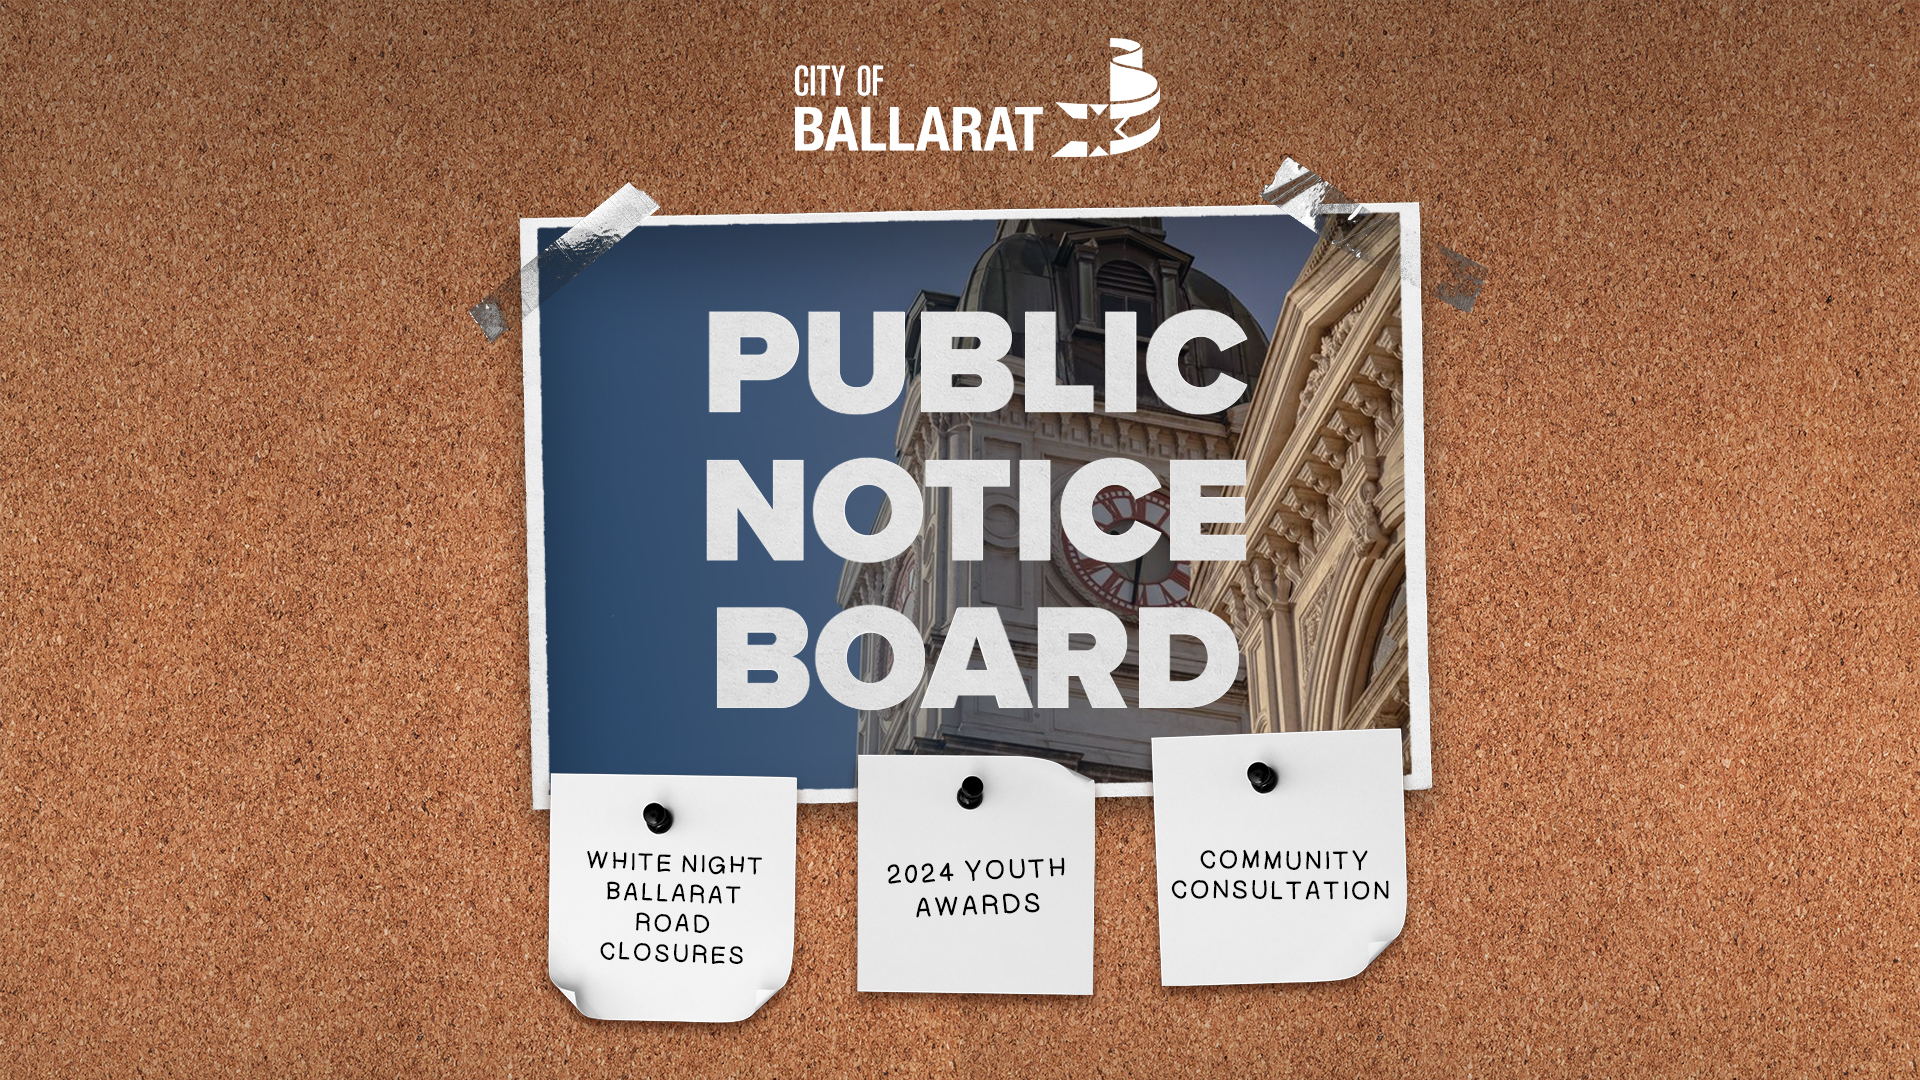 Notice board with Public Notice Board text over an image of Ballarat Town Hall. Three notes underneath with text saying White Night Ballarat Road Closures, 2024 Youth Awards, Community Consultation